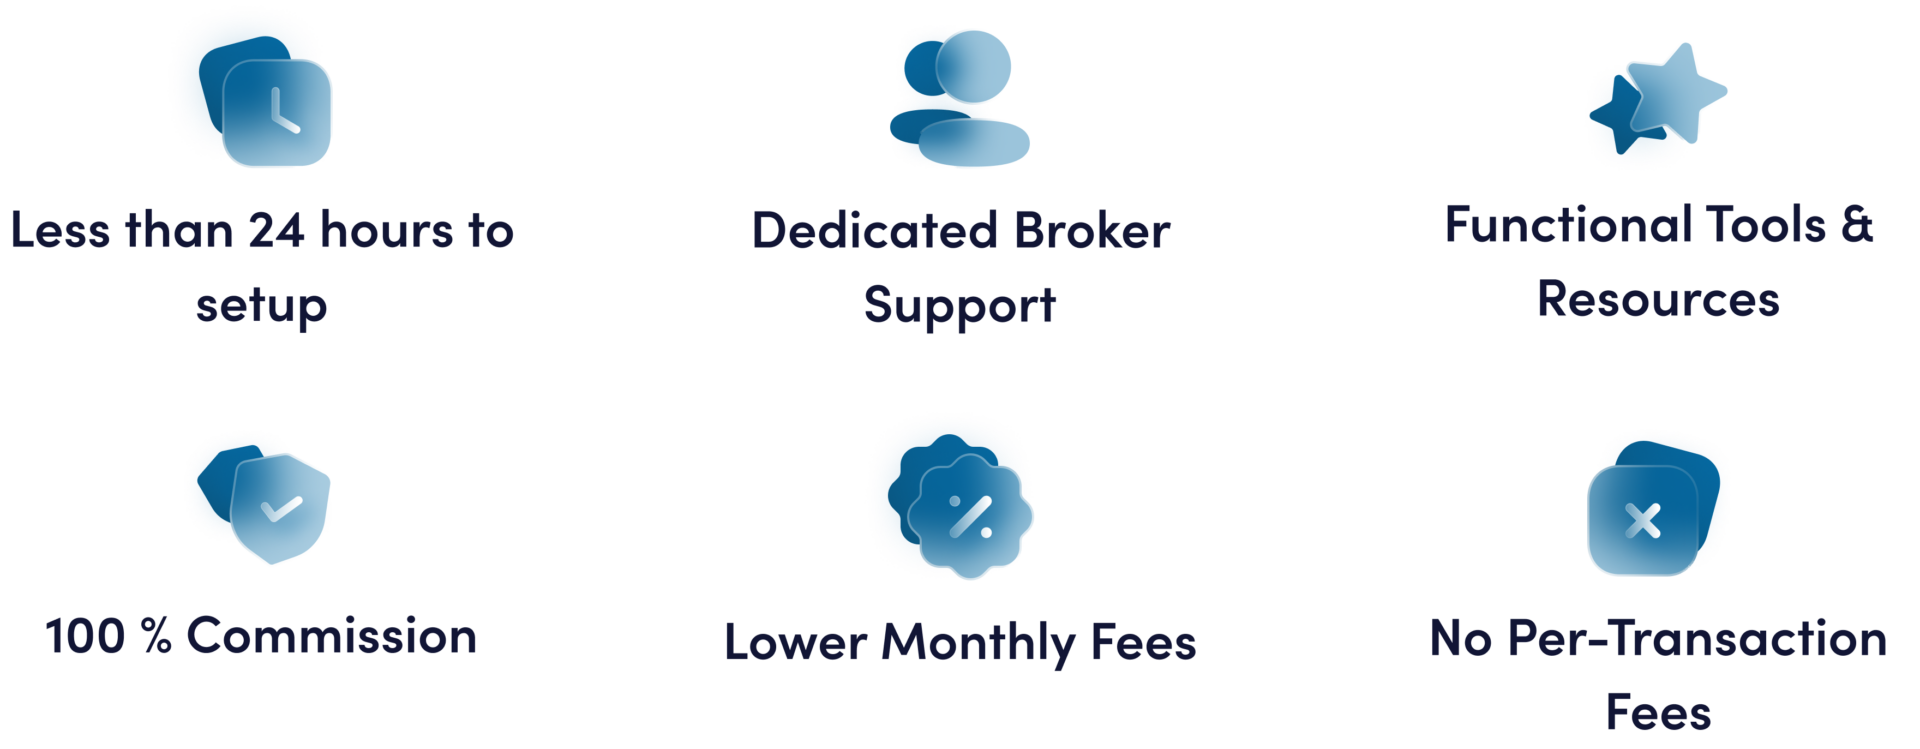 Best broker sponsorship advantages icluding fast setup, dedicated broker support, functional tools, 100% commission and low monthly fees